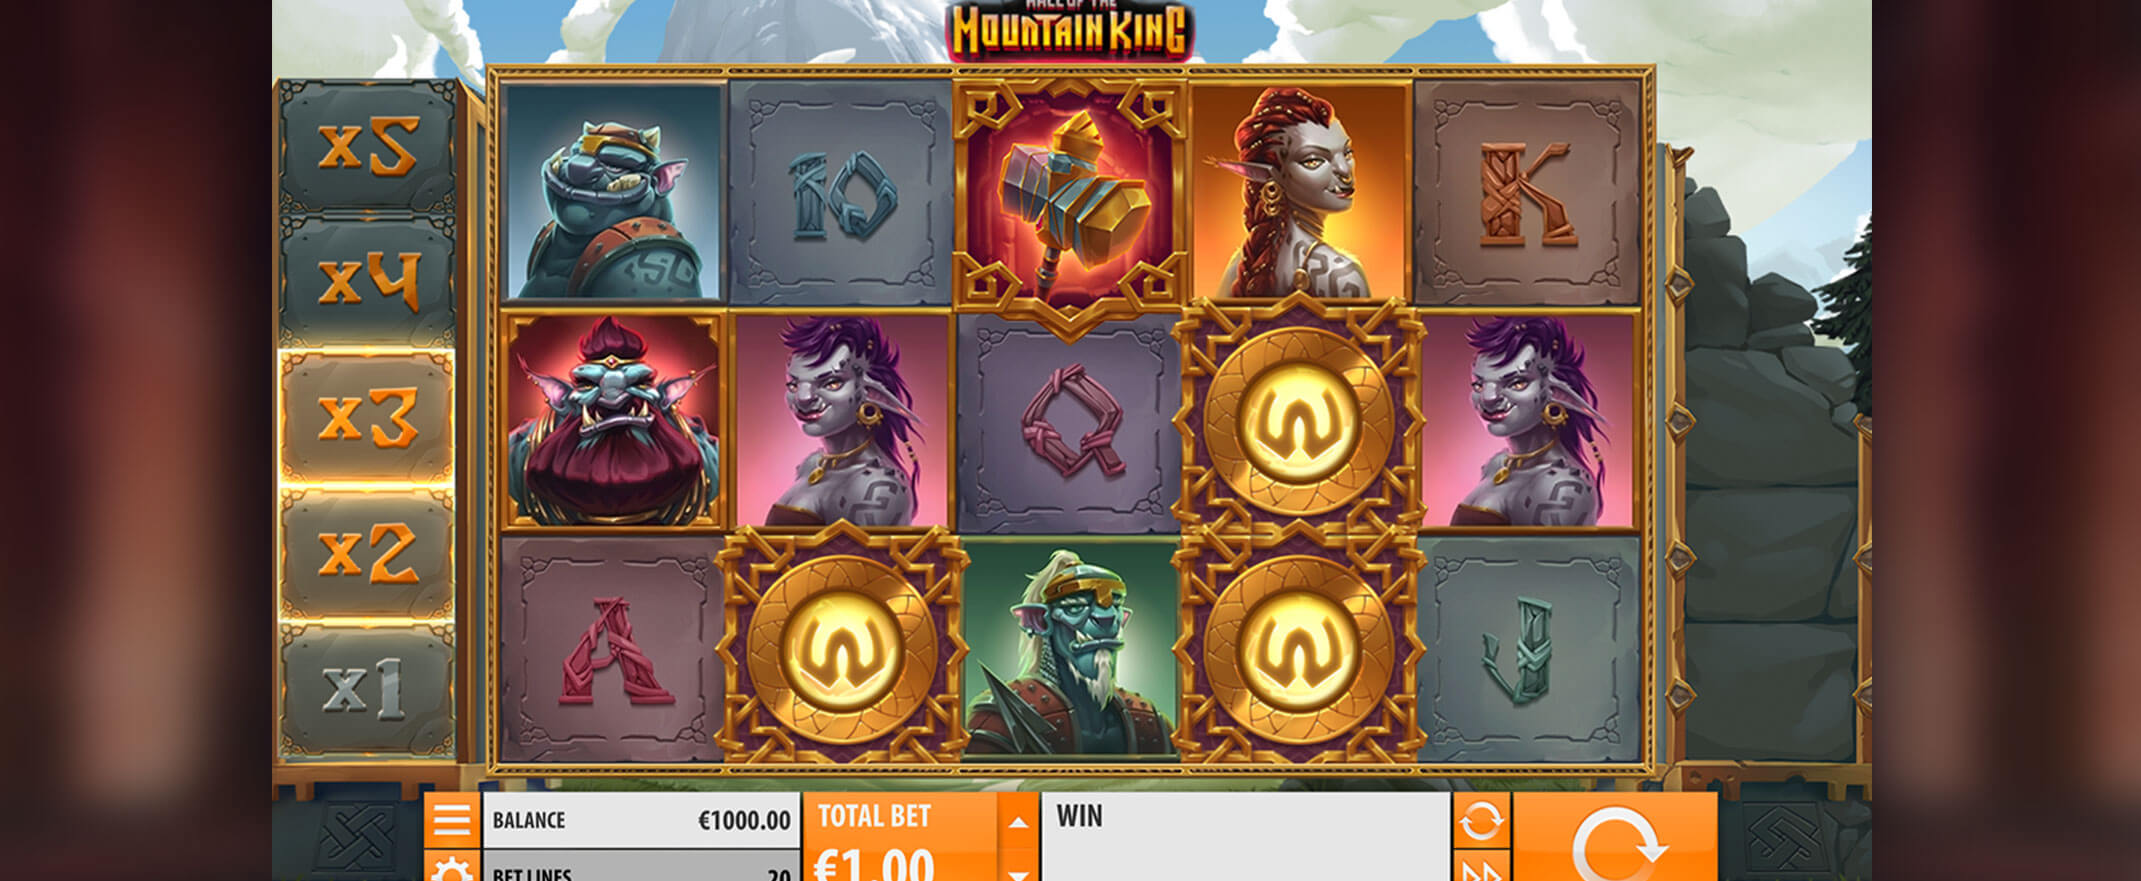 Hall of the Mountain King video slot from Quickspin